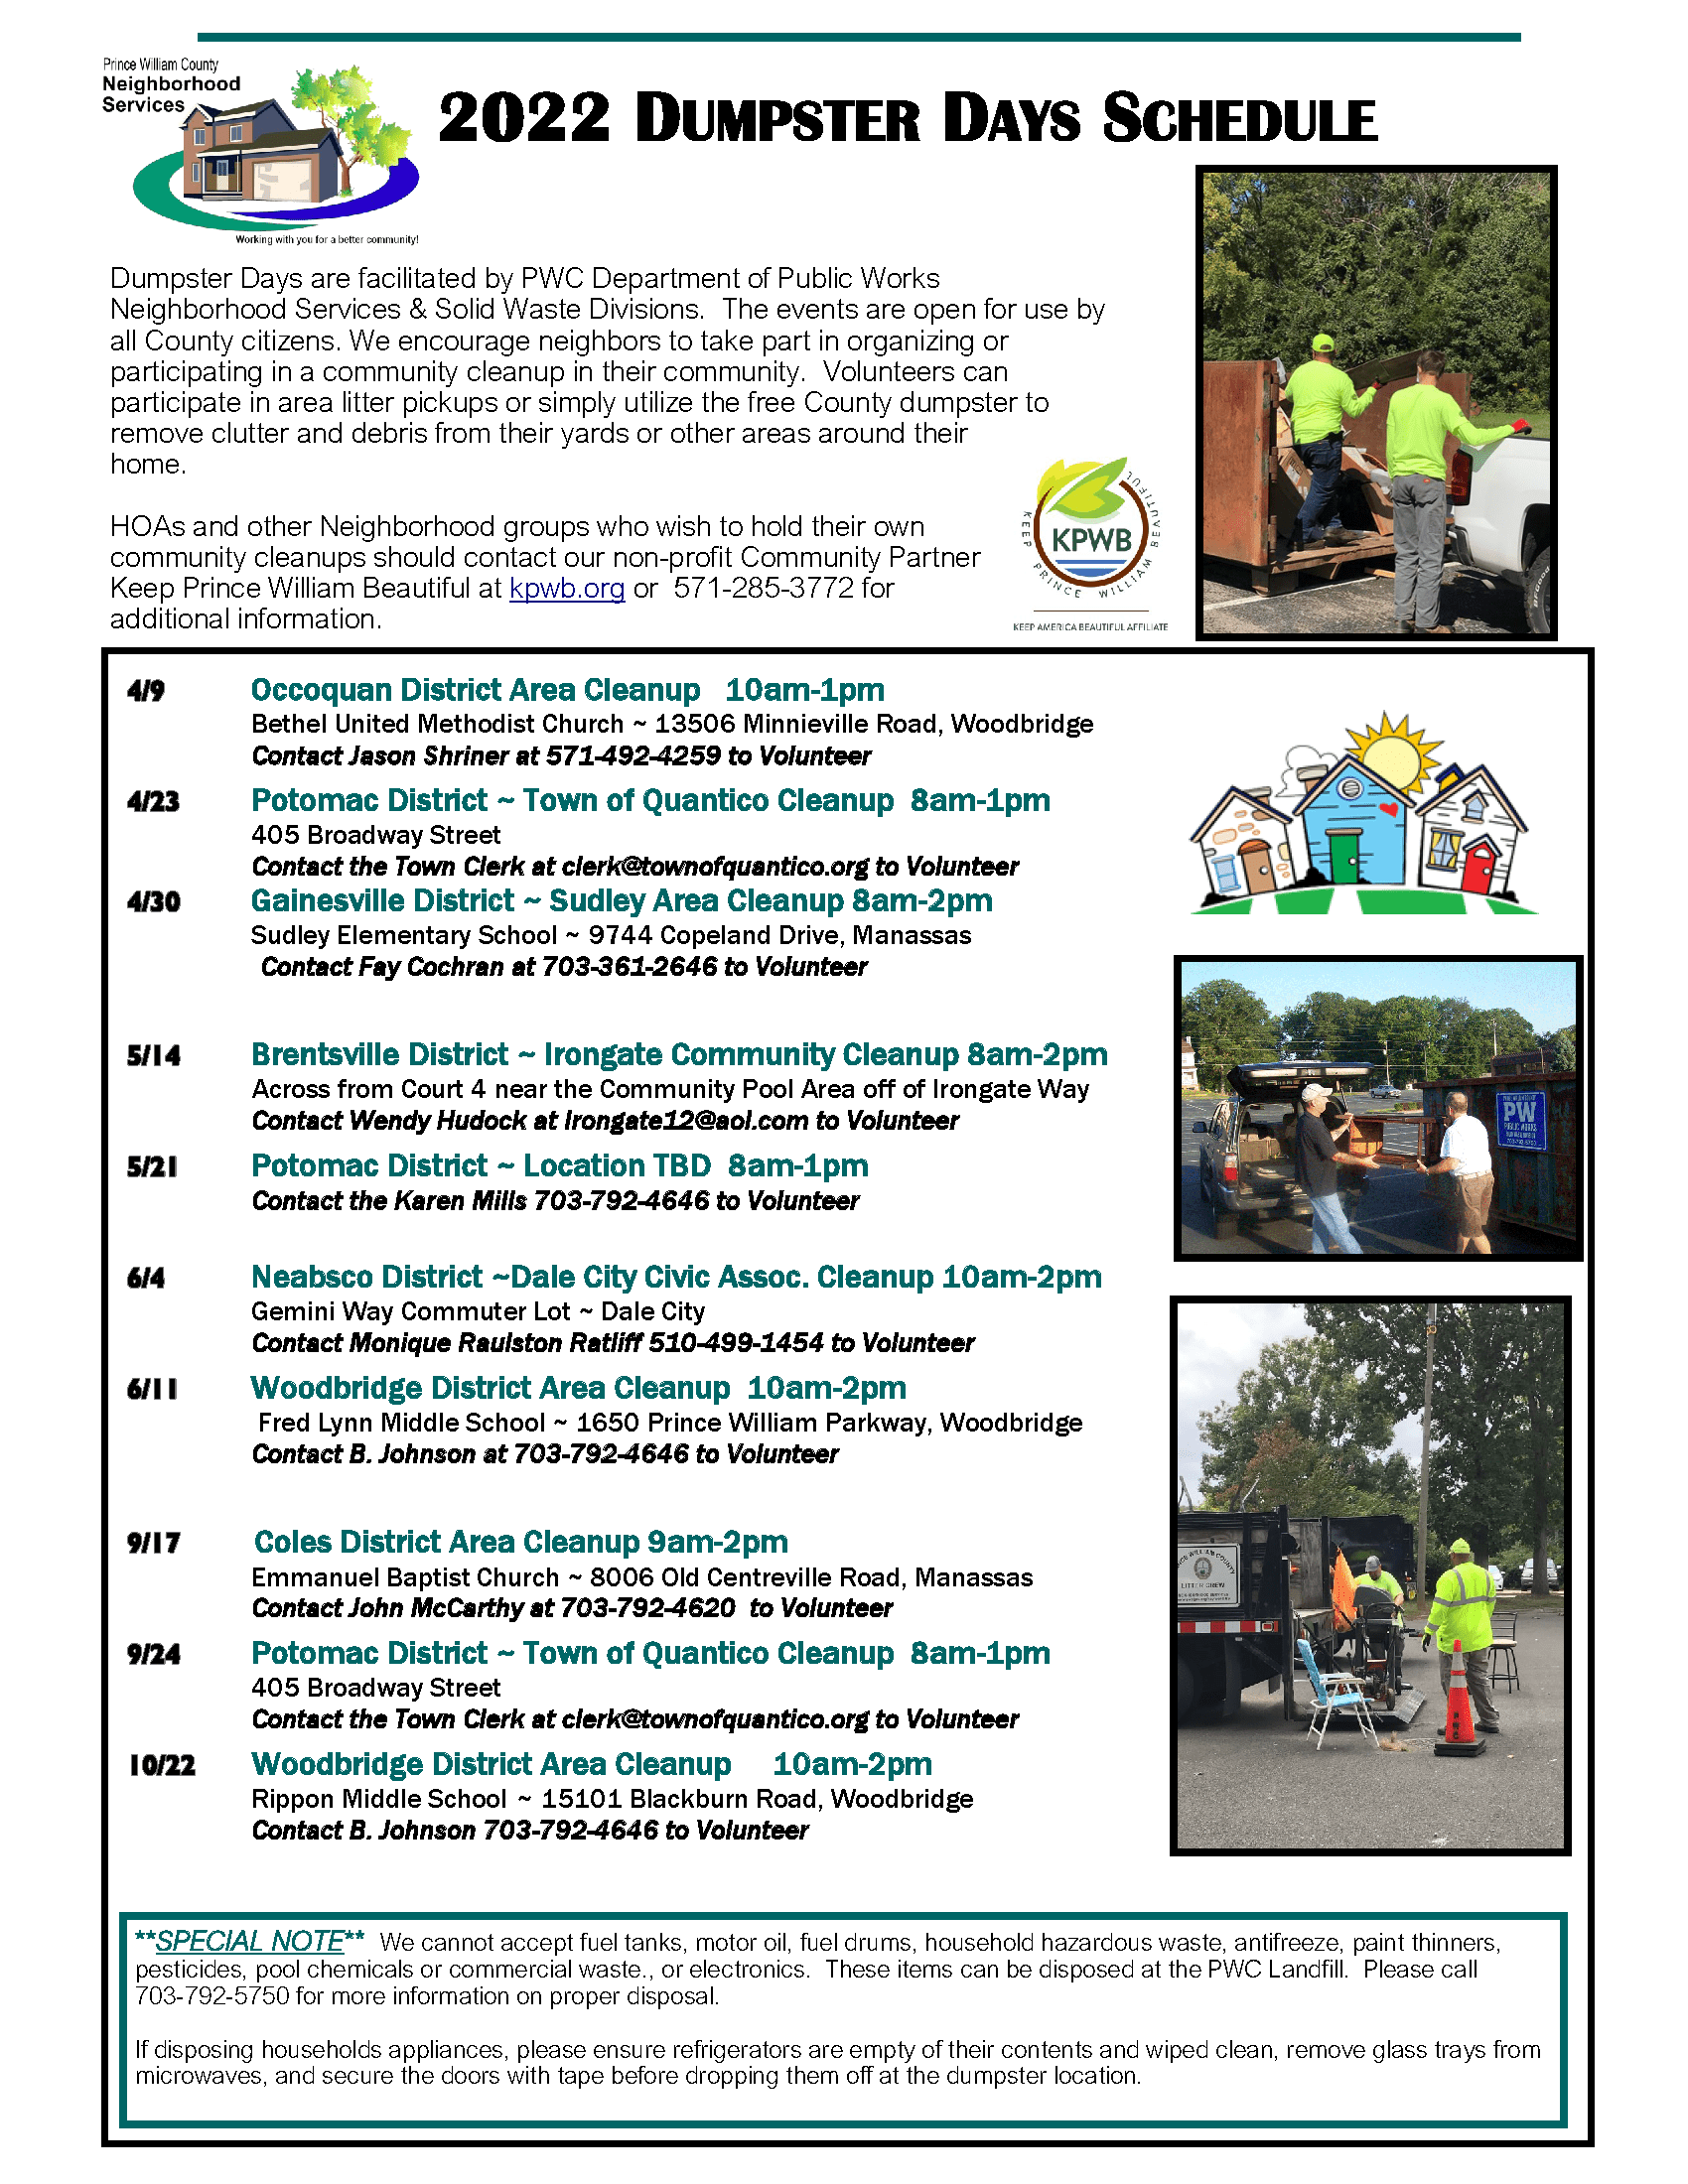 Dumpster Days Schedule 2022 FINAL 1 - 2022 DUMPSTER DAYS: Coles District Area Cleanup